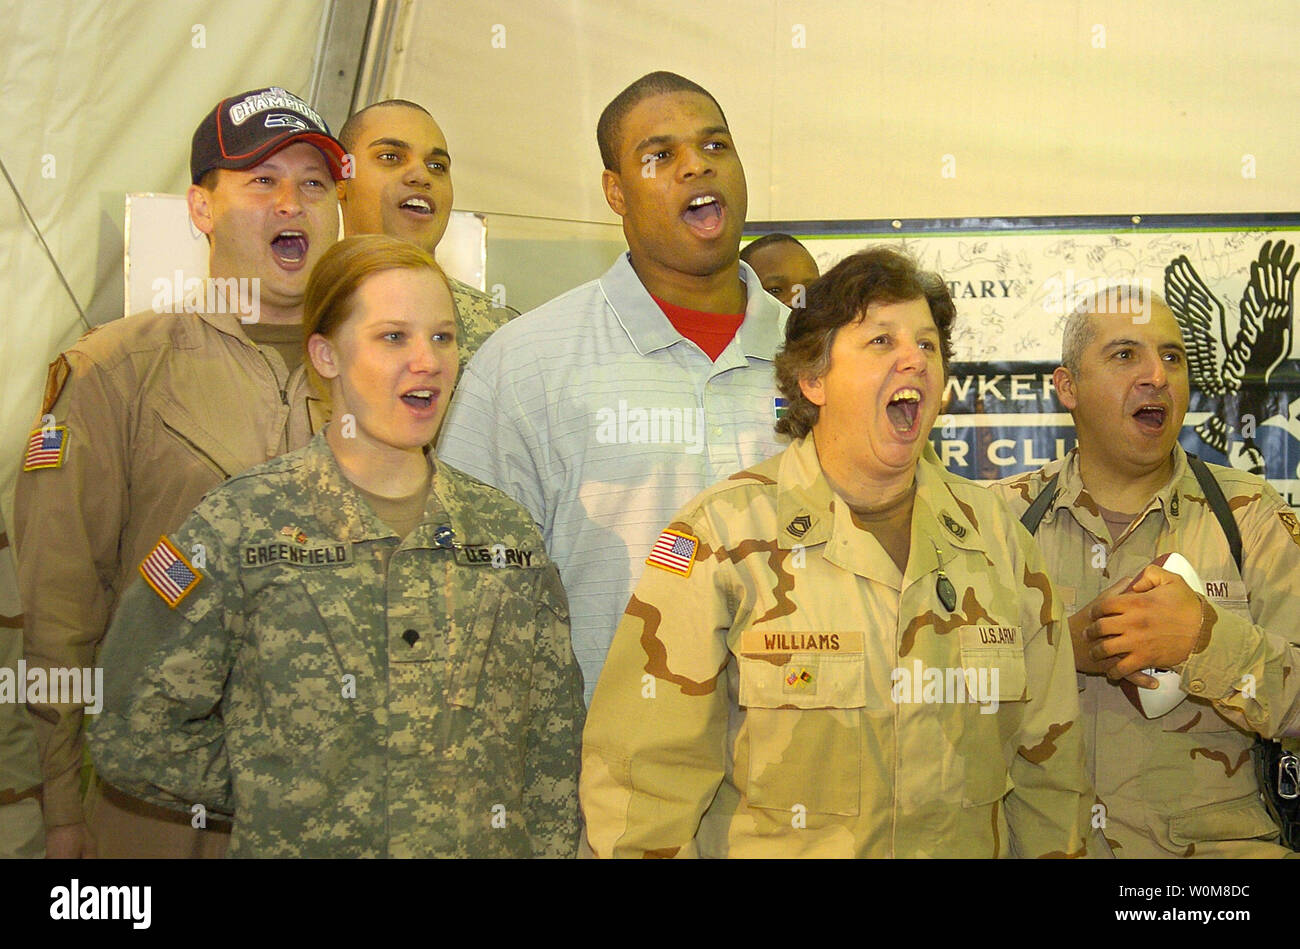 Seattle Seahawk's Bryce Fisher (civilian clothes) and Seahawks fans record a cheer to be used on the Seahawk's Jumbotron next season during a USO visit to Camp Eggers in Kabul, Afghanistan, April 4, 2006.  Fisher was joined by MSgt. Traci Williams (C), who is the Seahawks' Military Liason and is now deployed in Afghanistan. US troops (L-R) Spc. Jessica Greenfield, Evansville, IN, and MSgt. Jesus Ruiz, San Antonio, TX  joined in. The USO and NFL are marking a 40-year relationship of supporting US military with morale-boosting visits around the world.   (UPI Photo/Mike Theiler/USO) Stock Photo